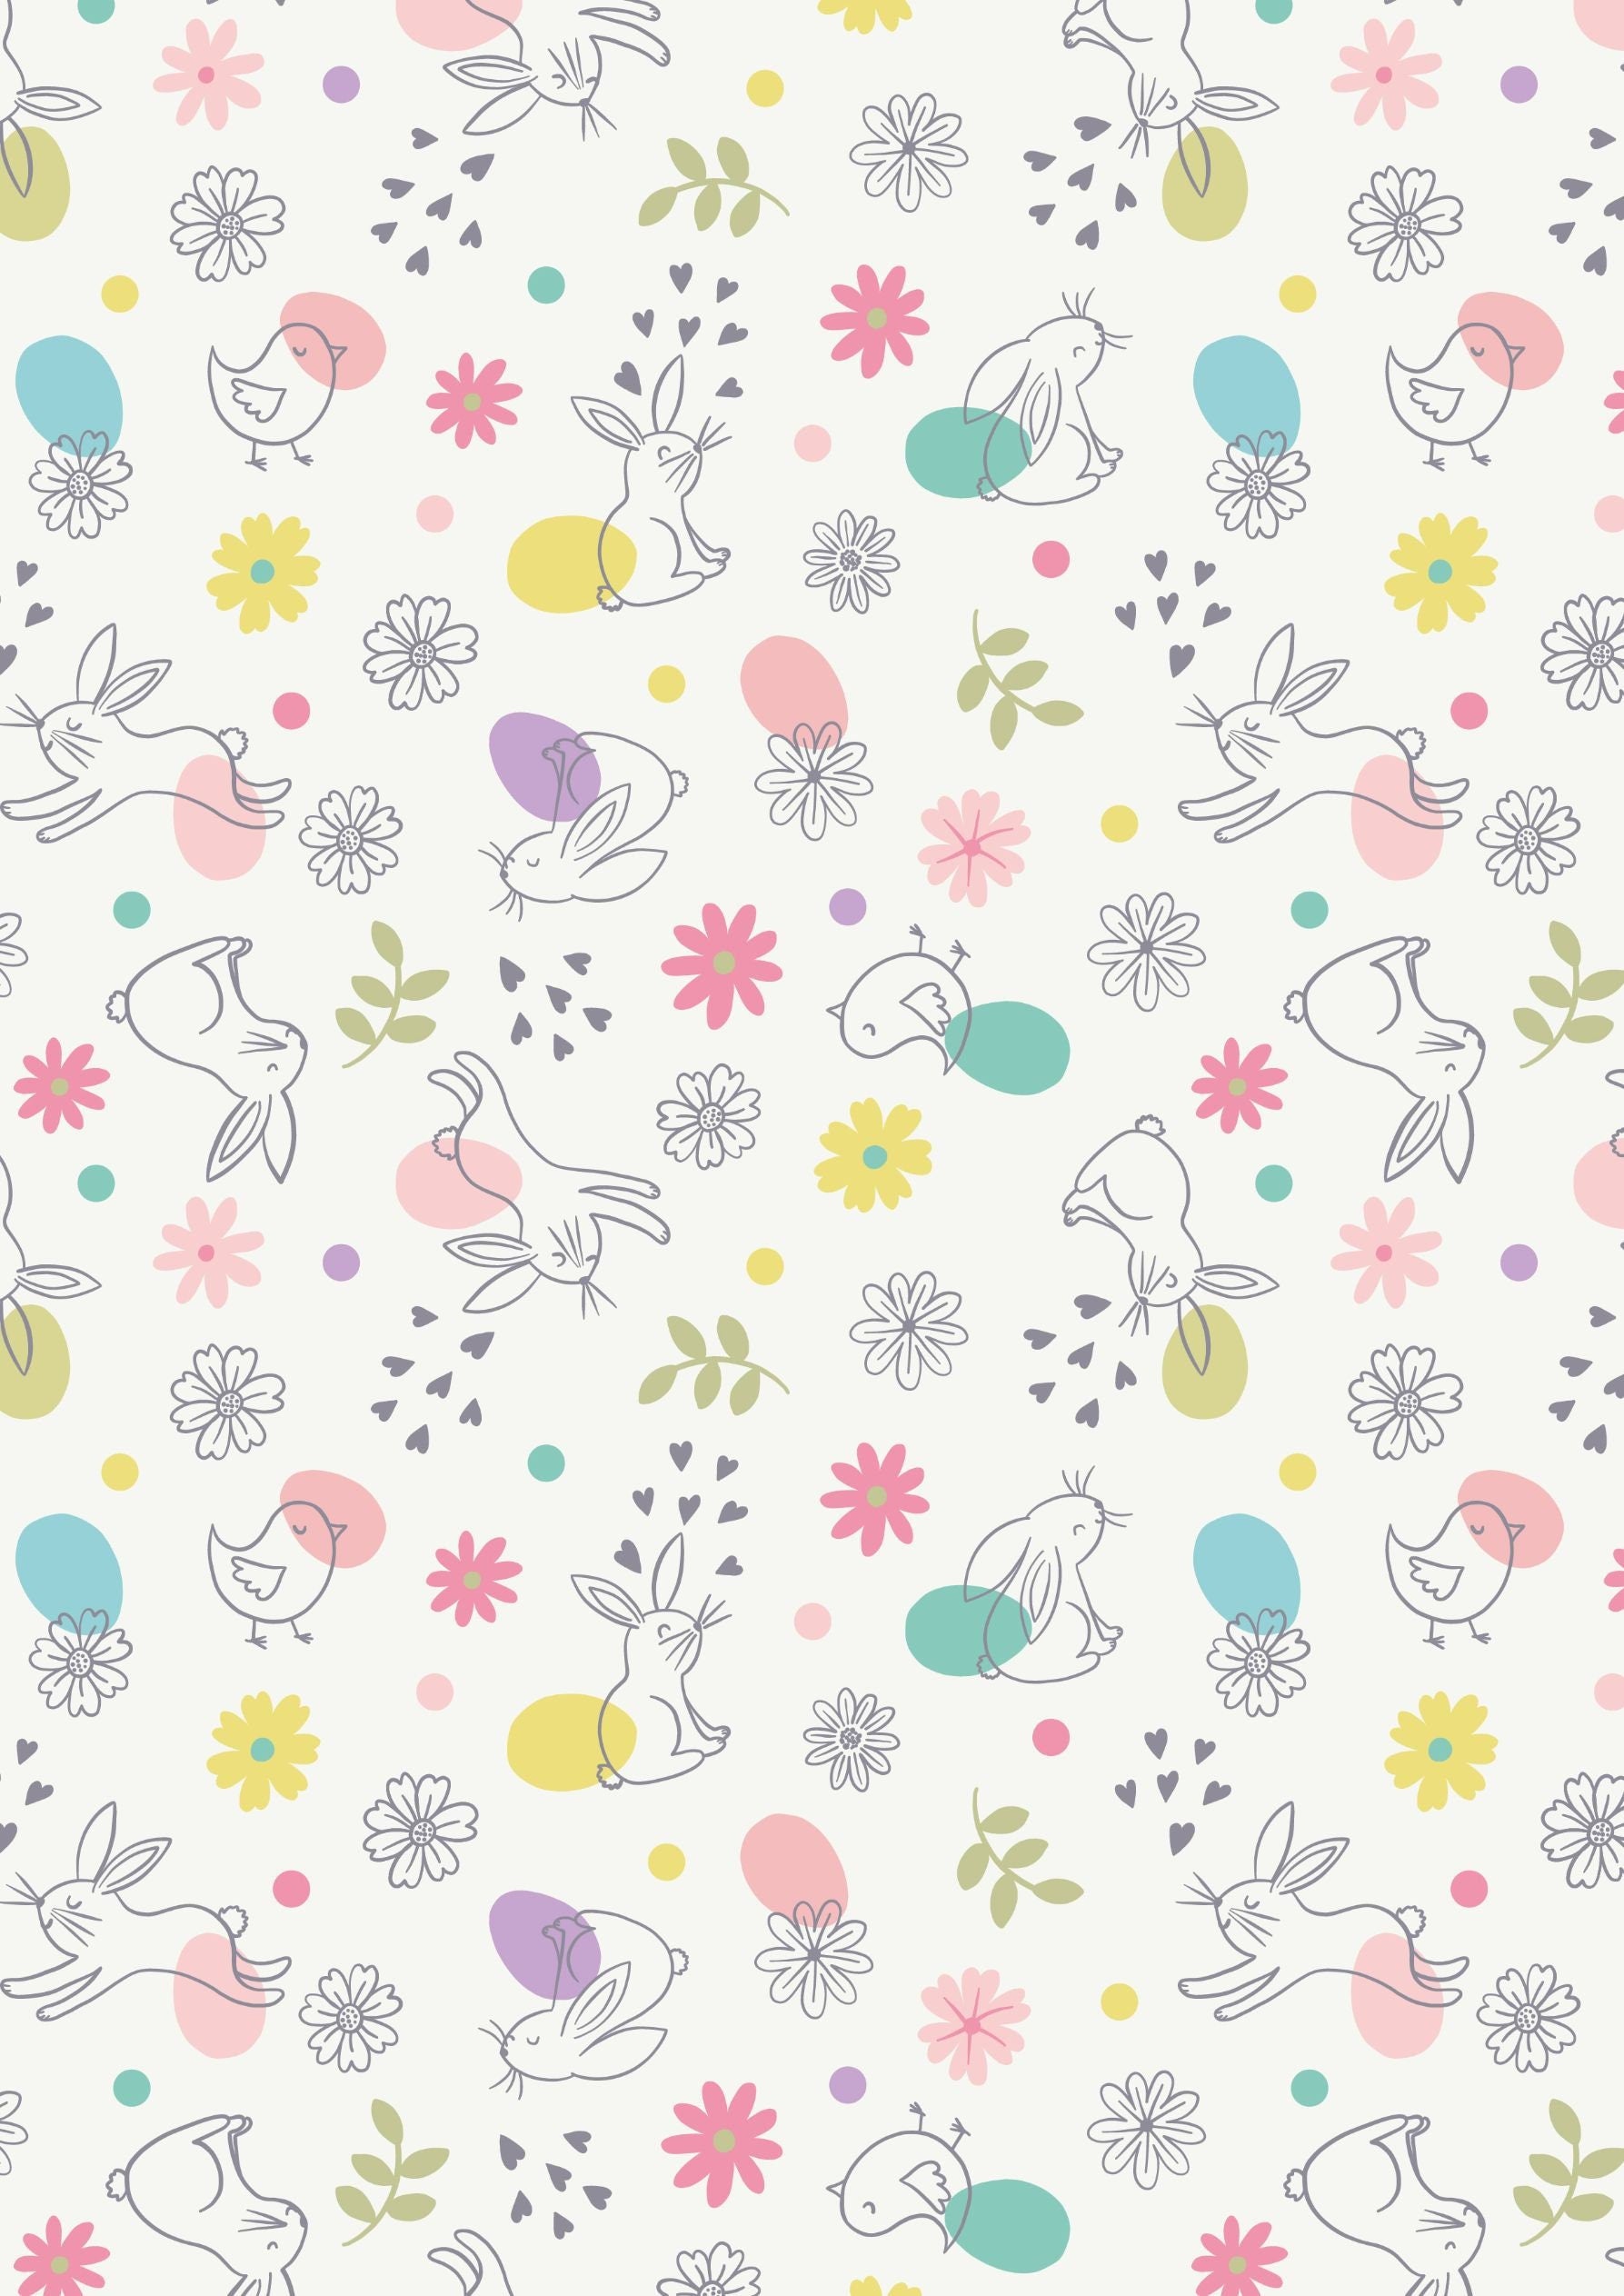 Chicks Eggs and Bunnies cotton fabric on light blue - 'Spring Treats' Lewis & Irene